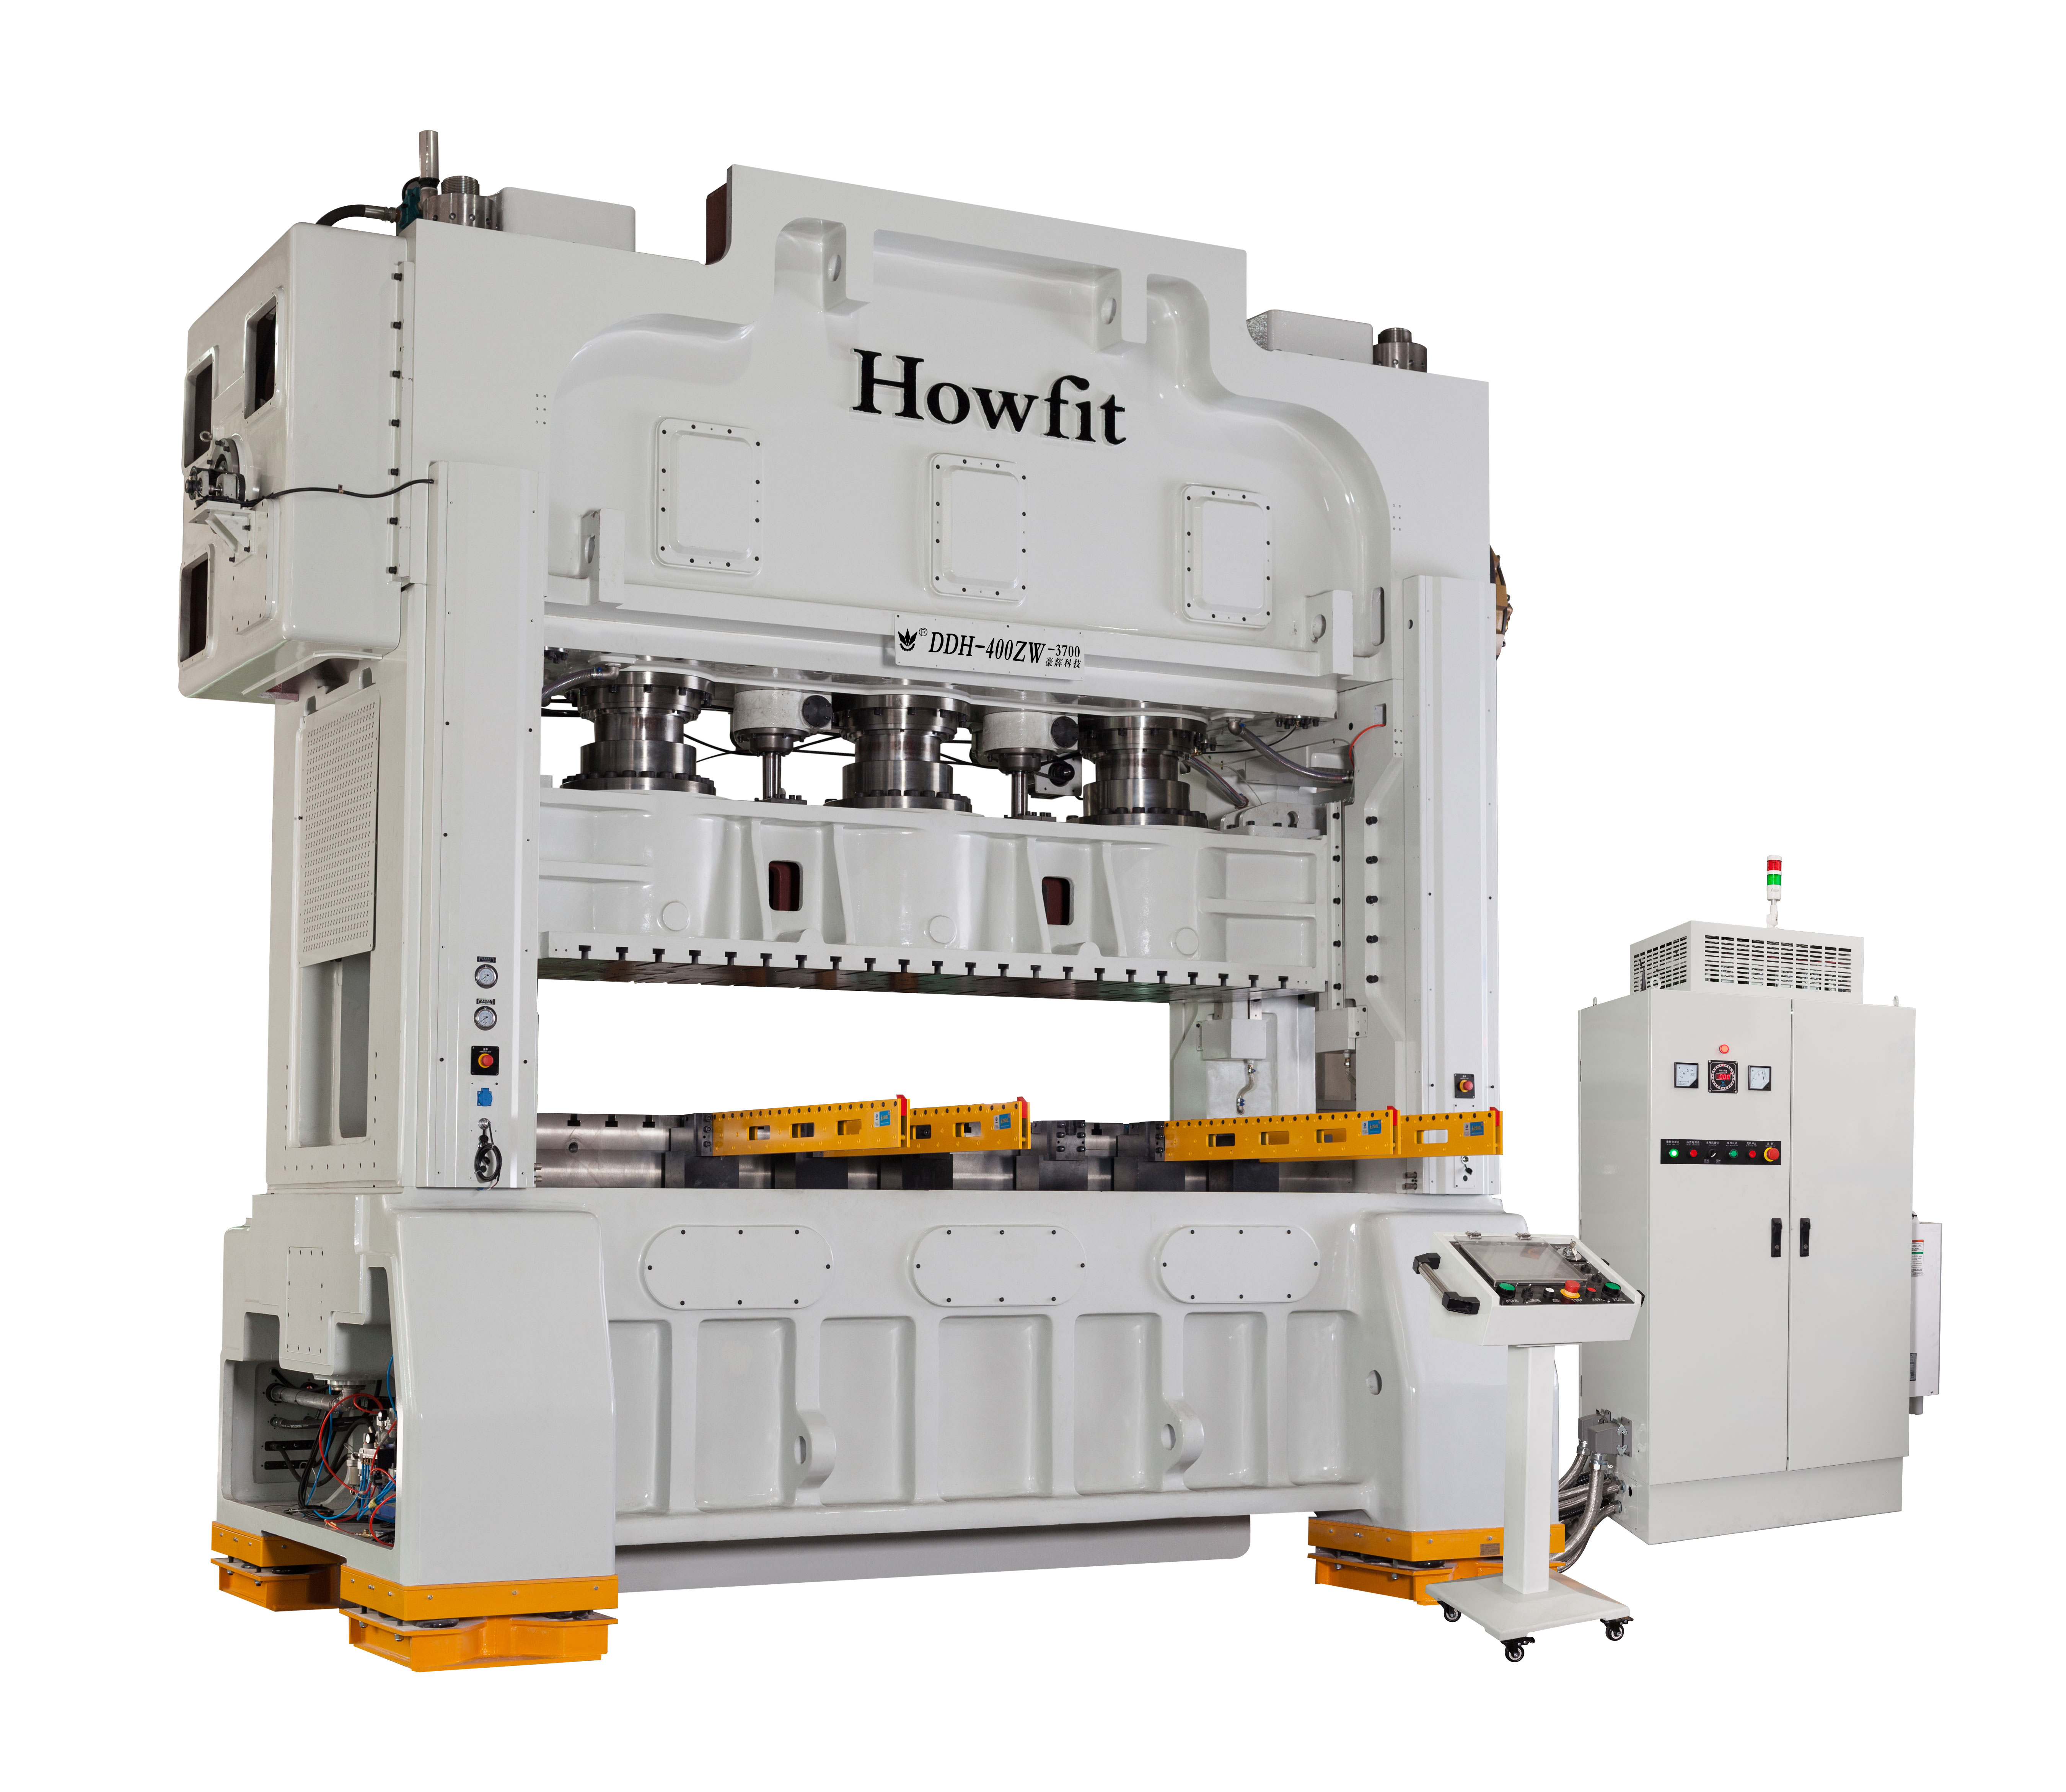 HOWFIT DDH 400T ZW-3700 manufacturing quality assurance